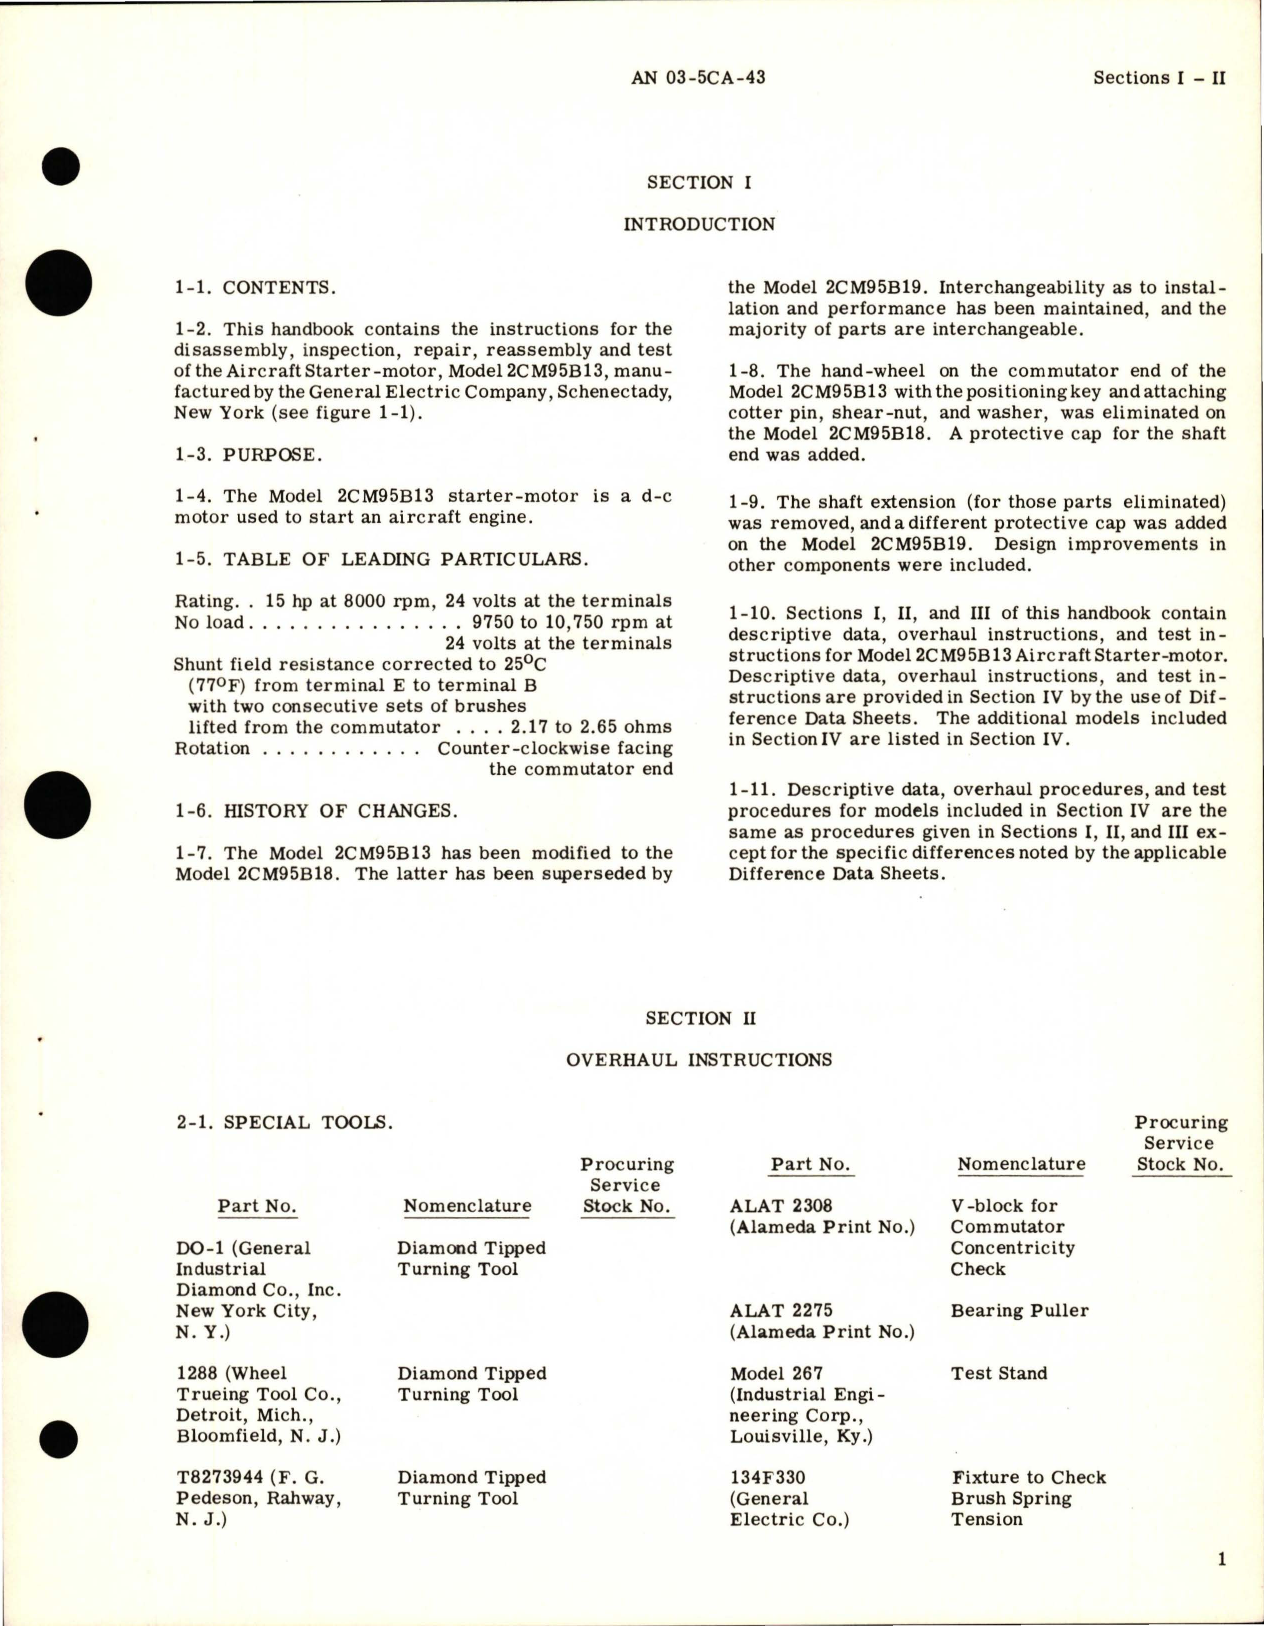 Sample page 5 from AirCorps Library document: Overhaul Instructions for Starter-Motors - Models 2CM95B13, 2CM95B18, and 2CM95B19 